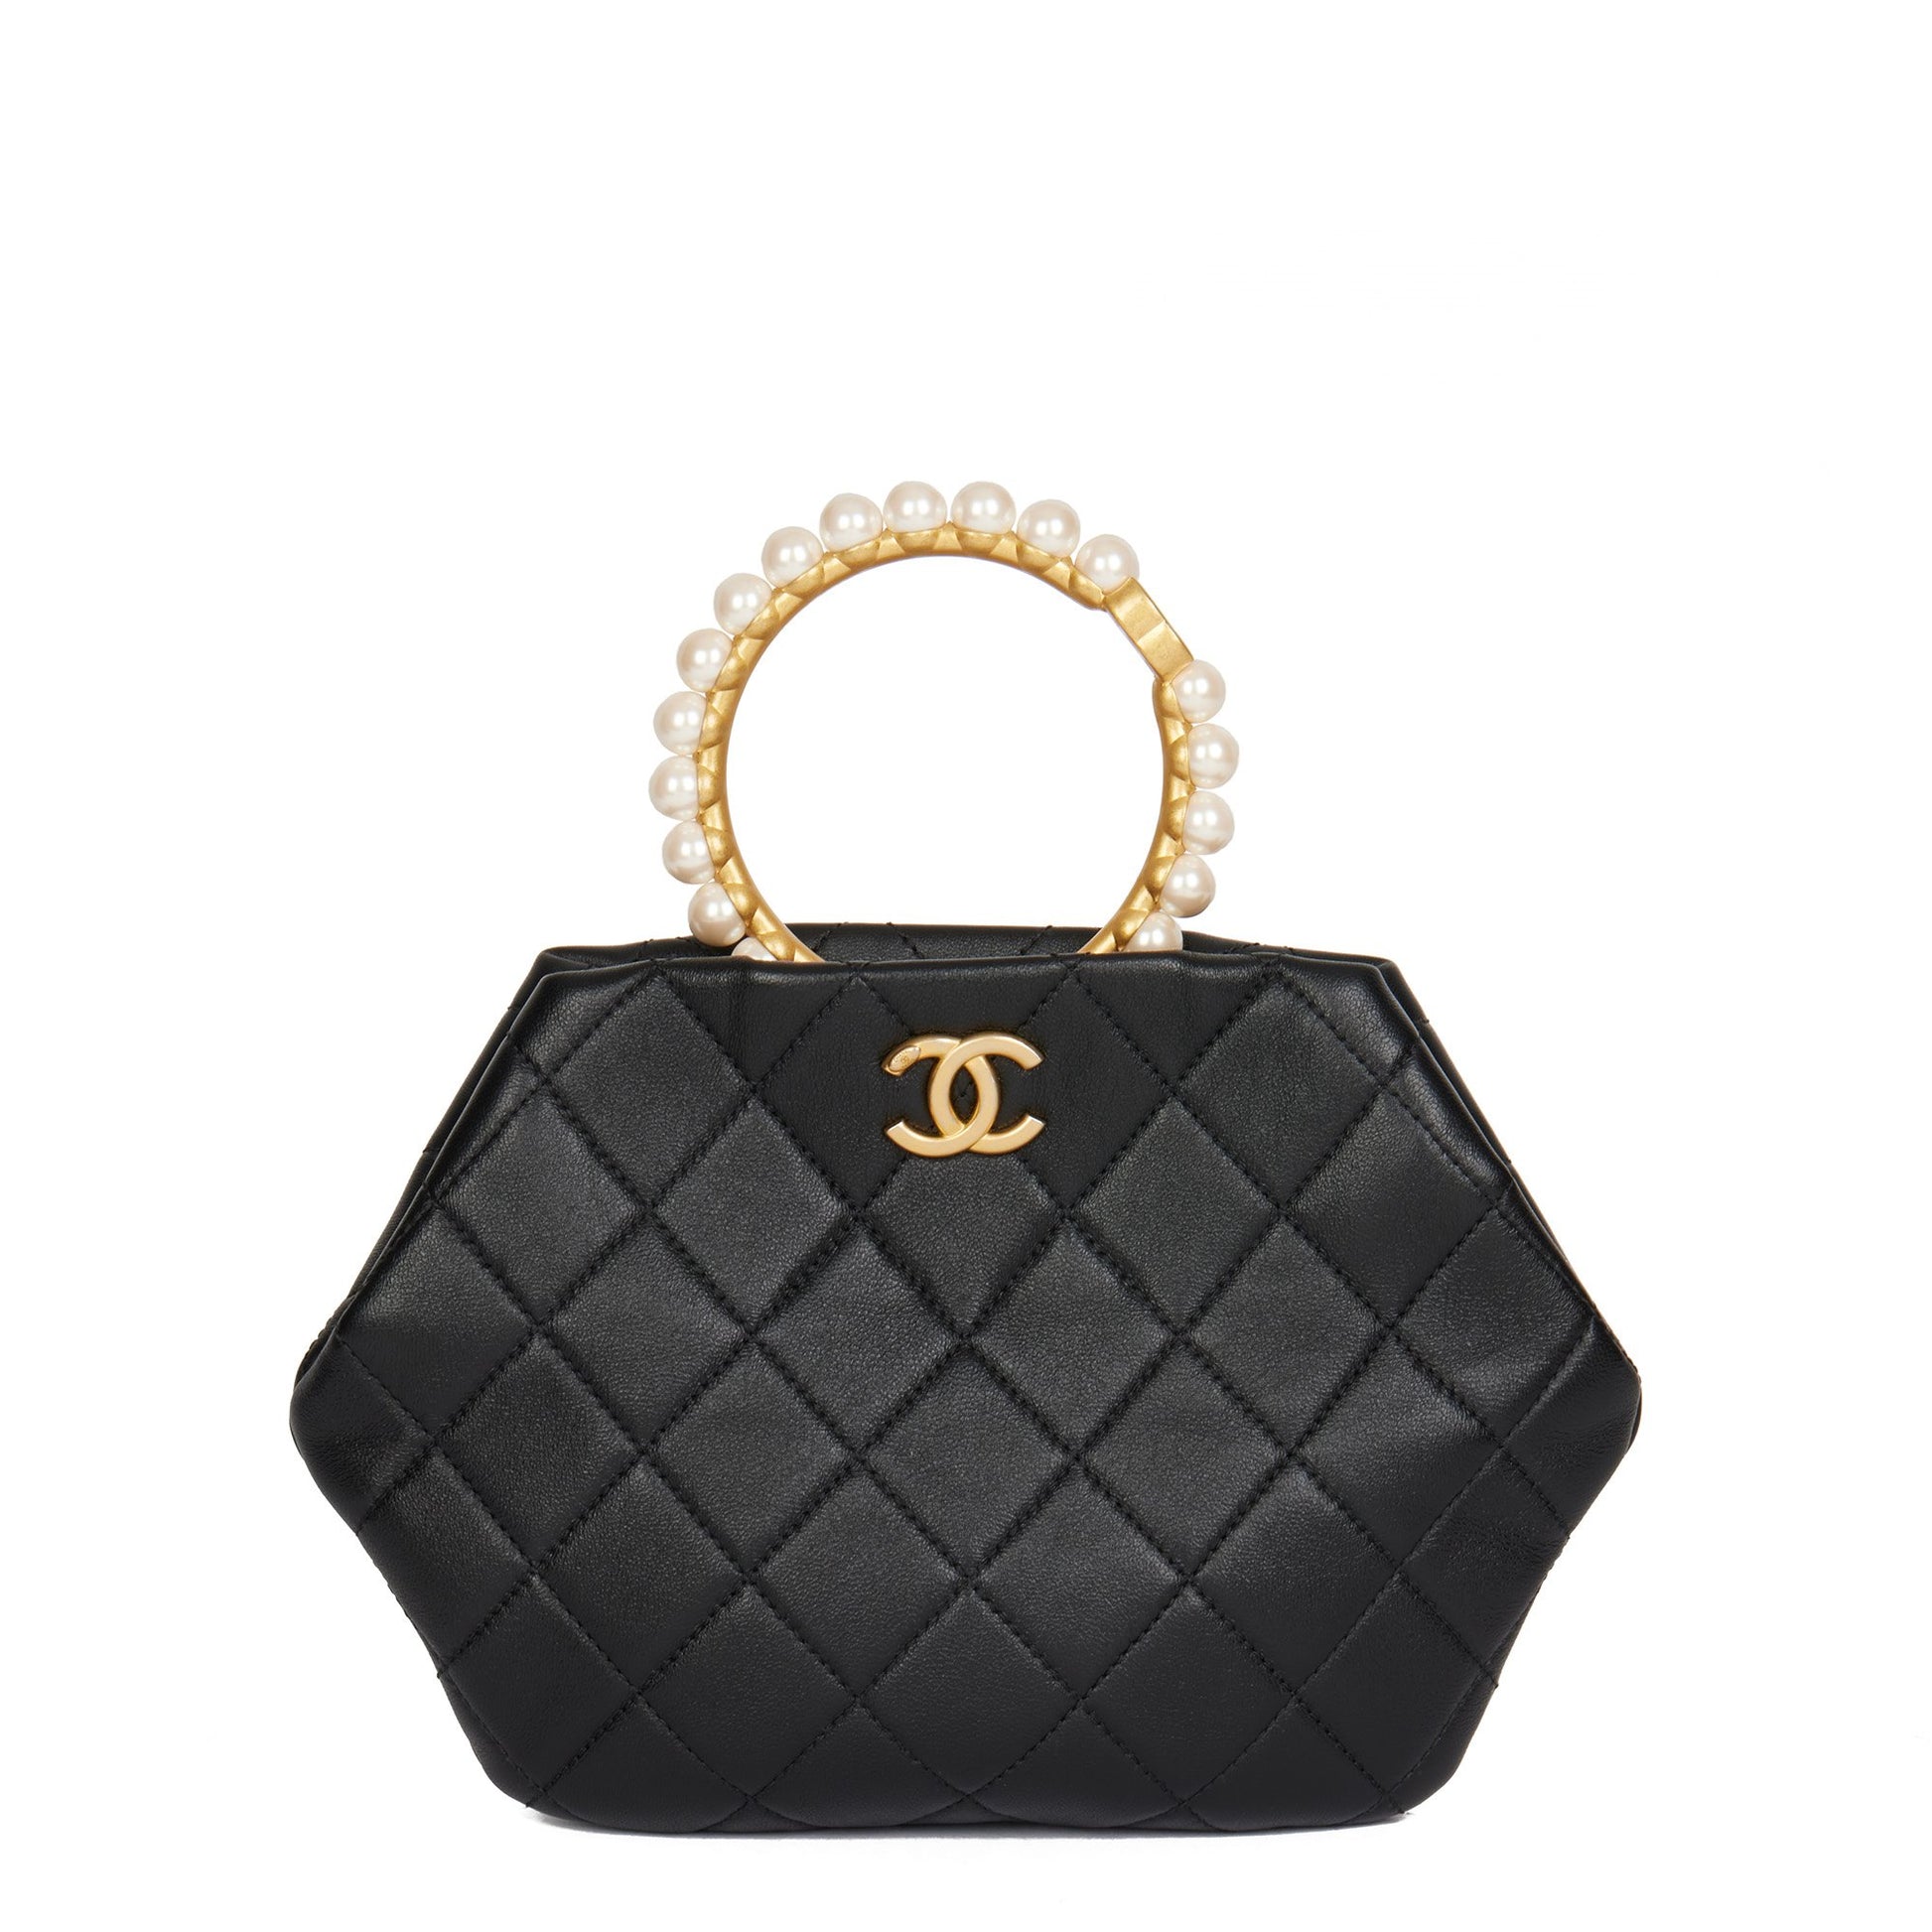 Chanel Black Quilted Lambskin Pearl Handle Clutch Bag